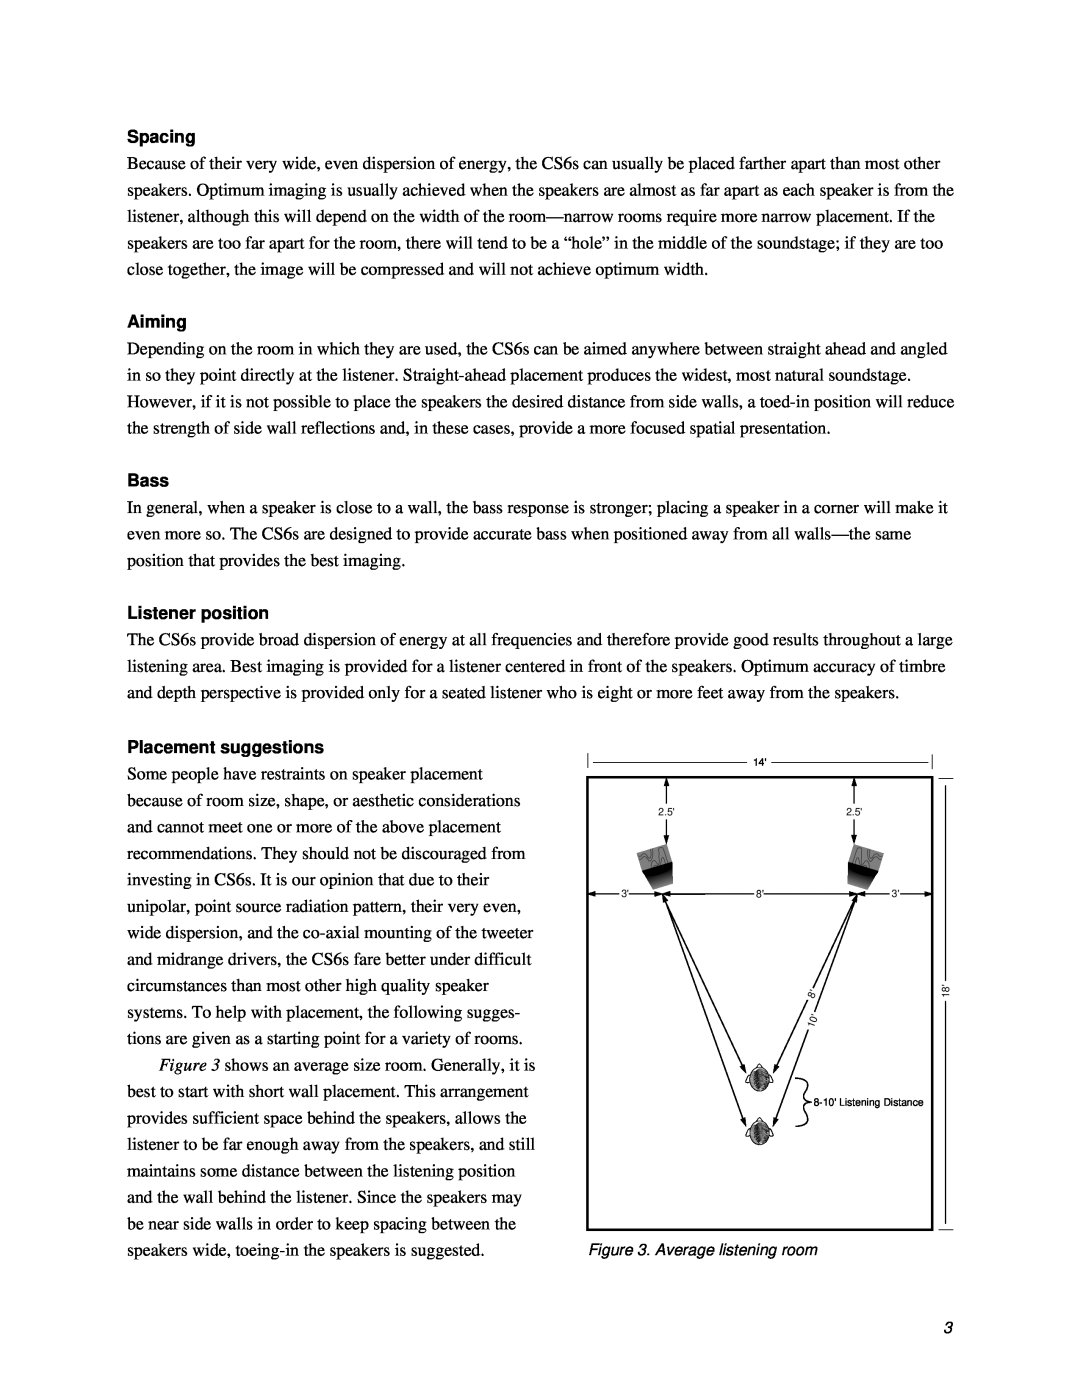 Thiel Audio Products CS6 manual Spacing, Aiming, Bass, Listener position, Placement suggestions 